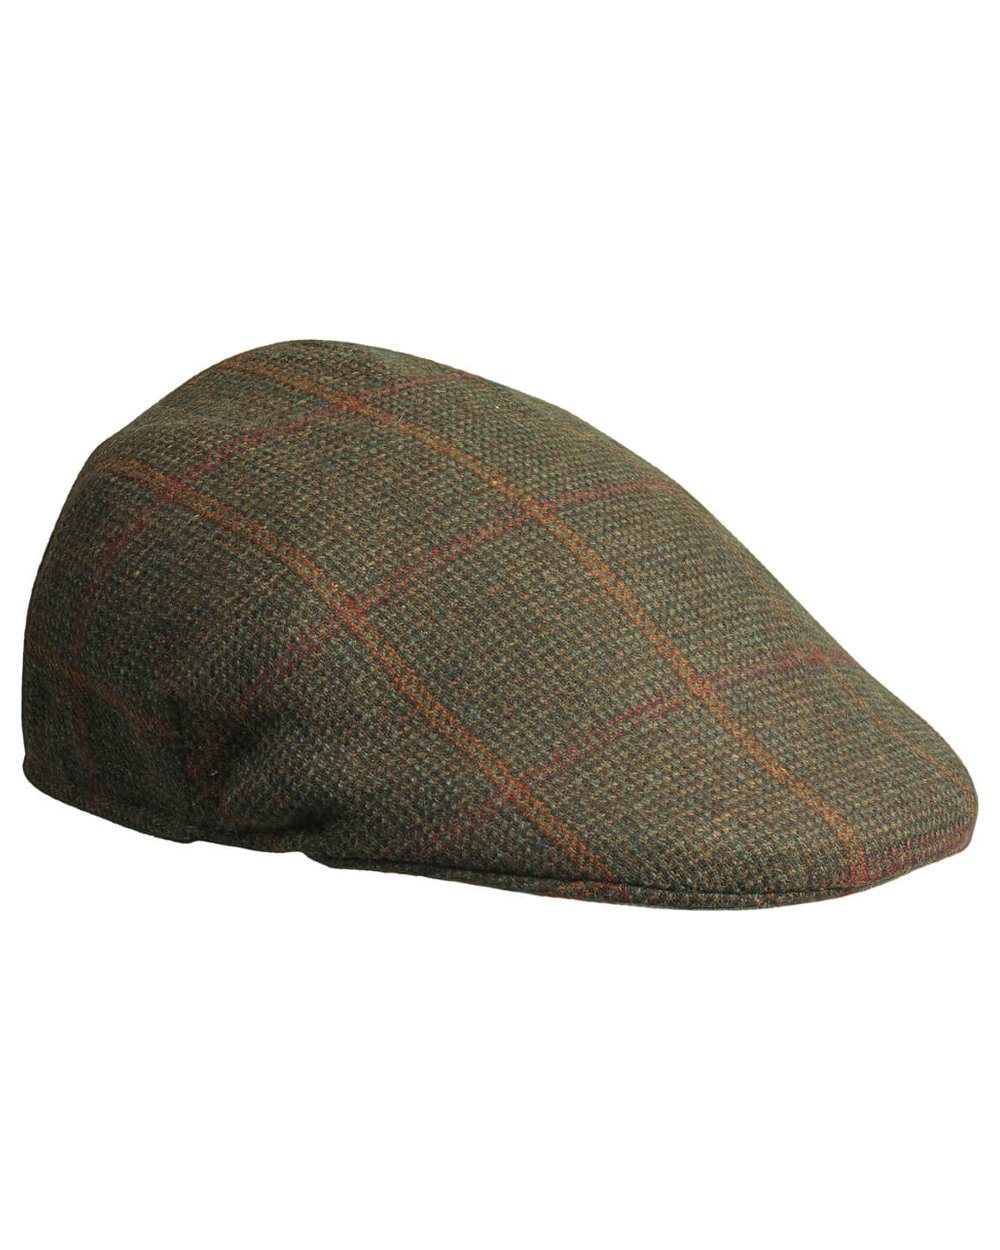 Laksen Hastings Ghillies Flat Cap With Earwarmer On A White Background